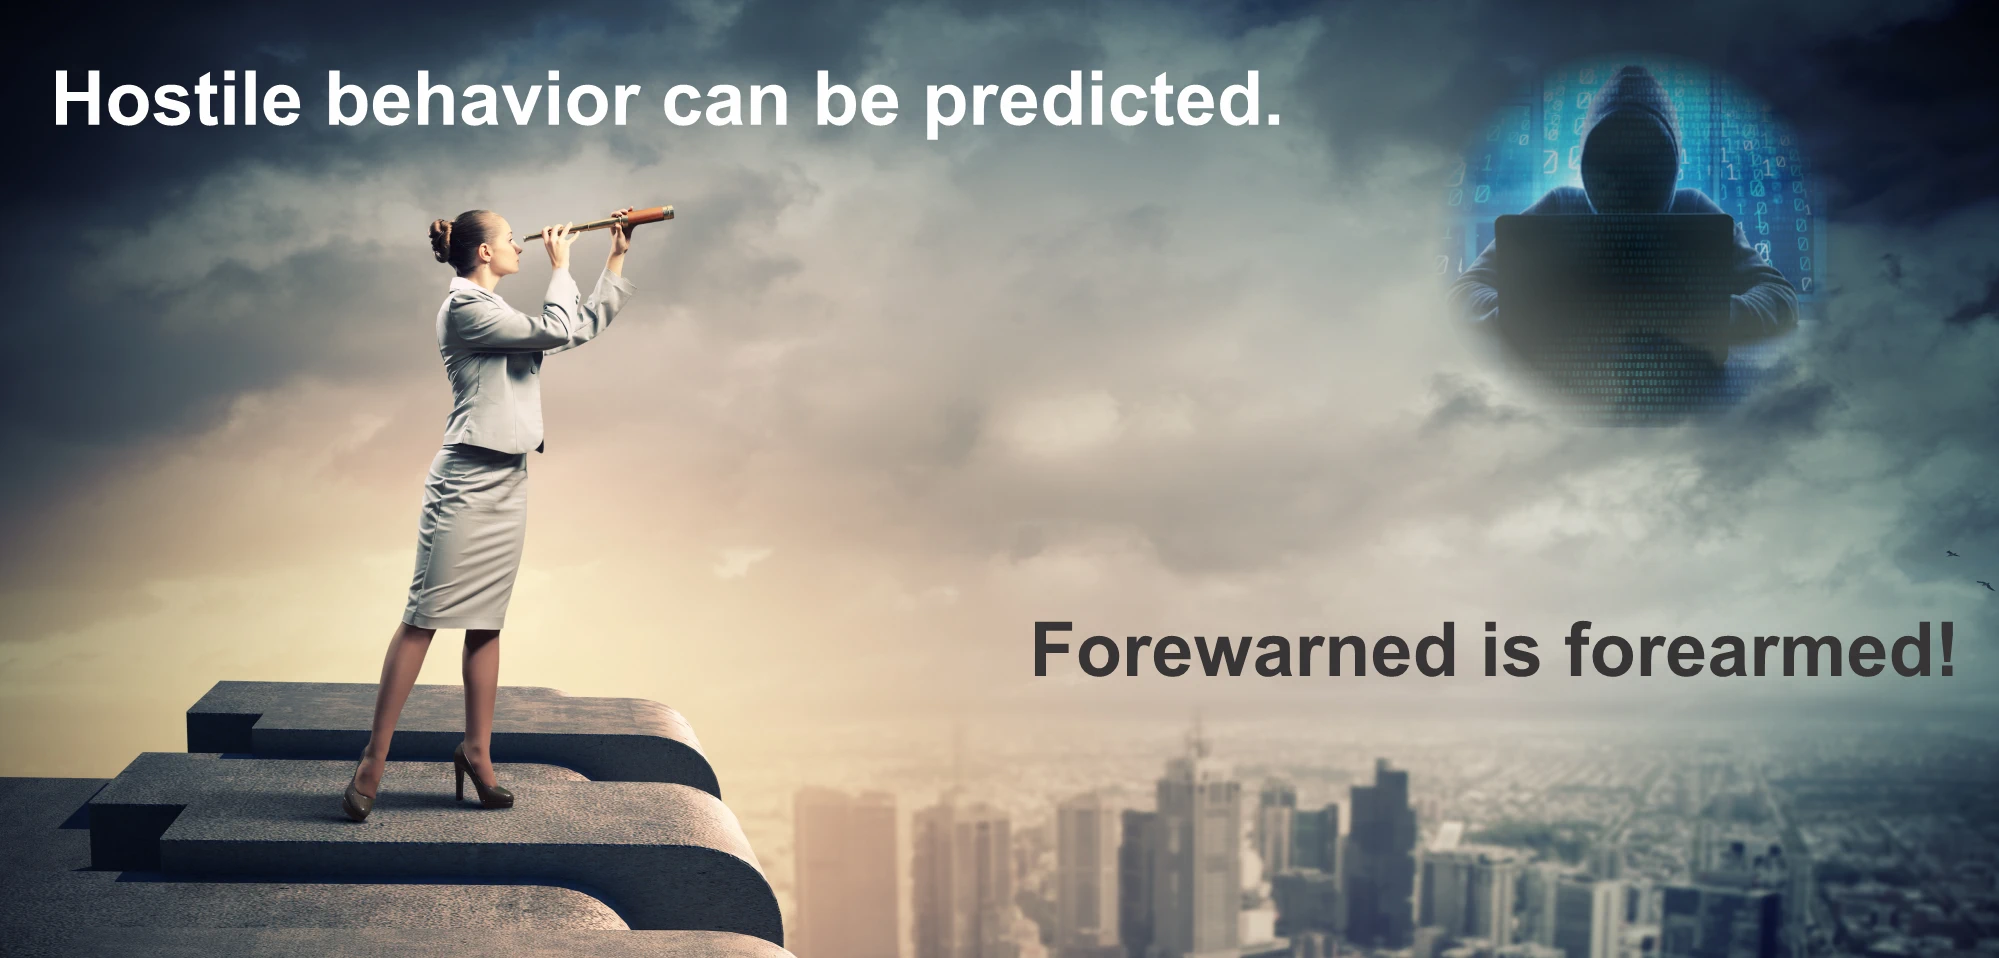 Hostile behavior can be predicted. Forewarned is forearmed! 
        Use Amenaza's SecurITree software for predictive analytical modeling